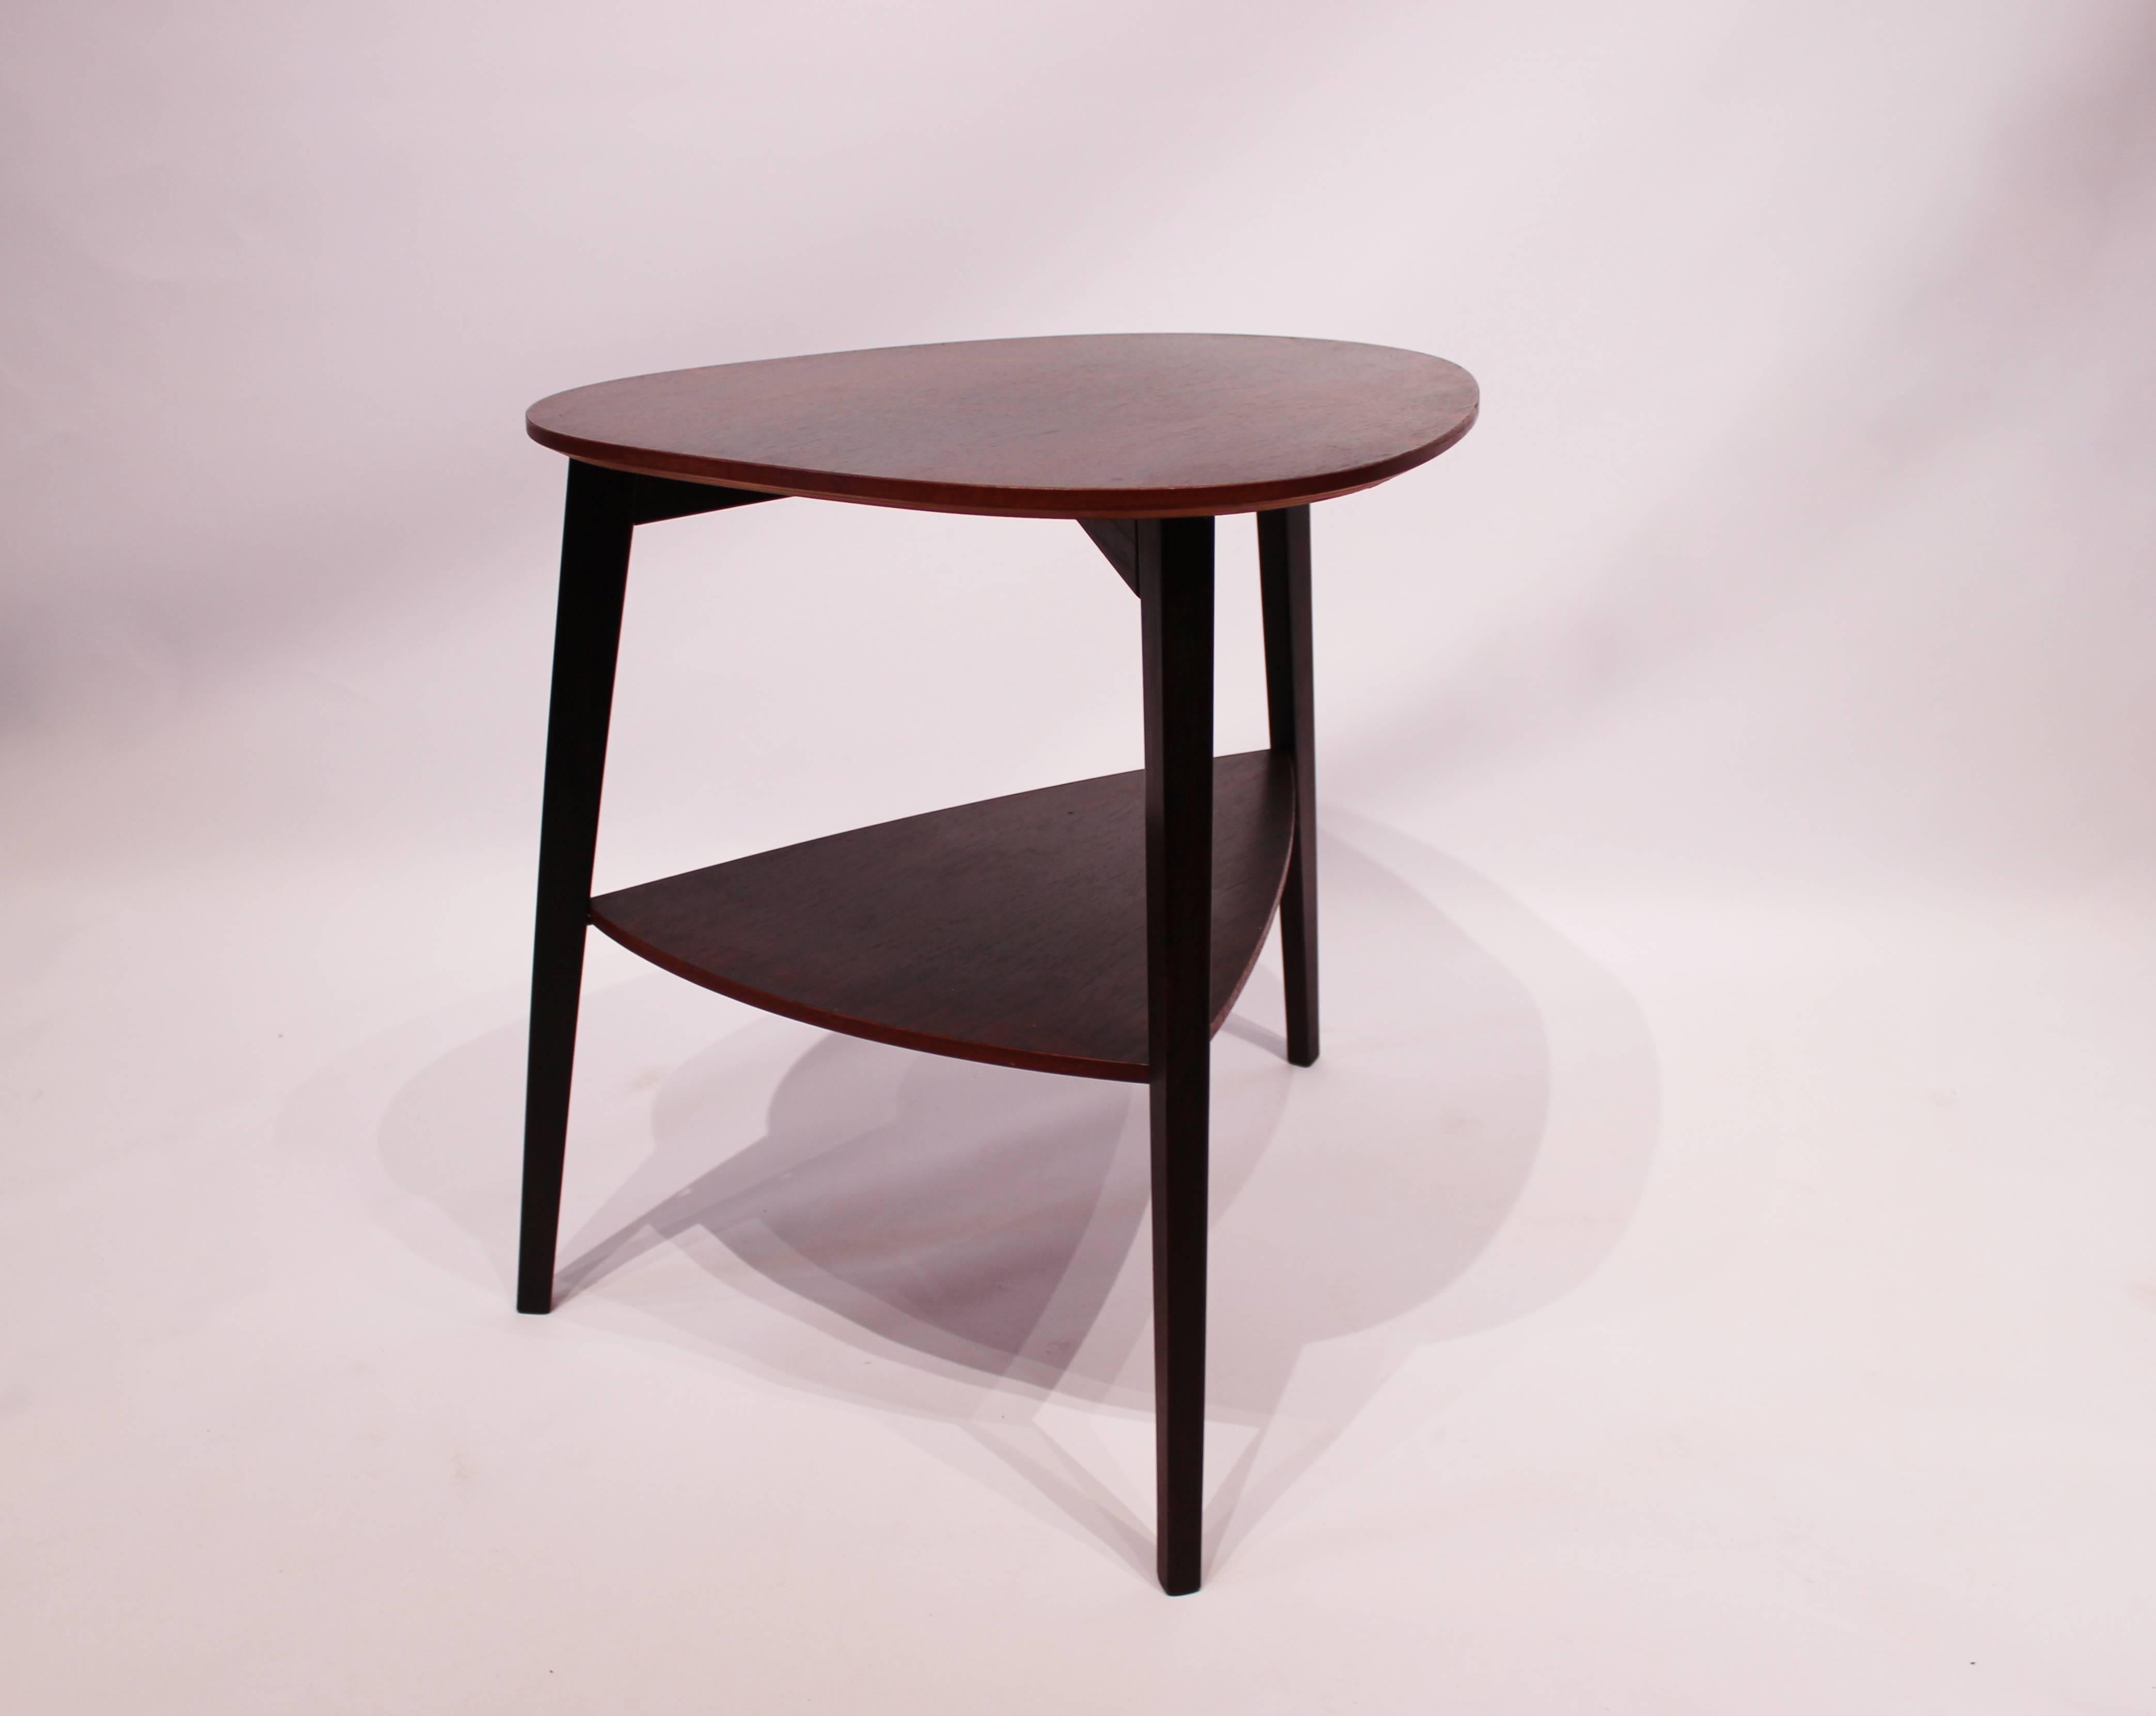 Side table in dark wood of beautiful Danish design from the 1960s. The table is in great vintage condition.